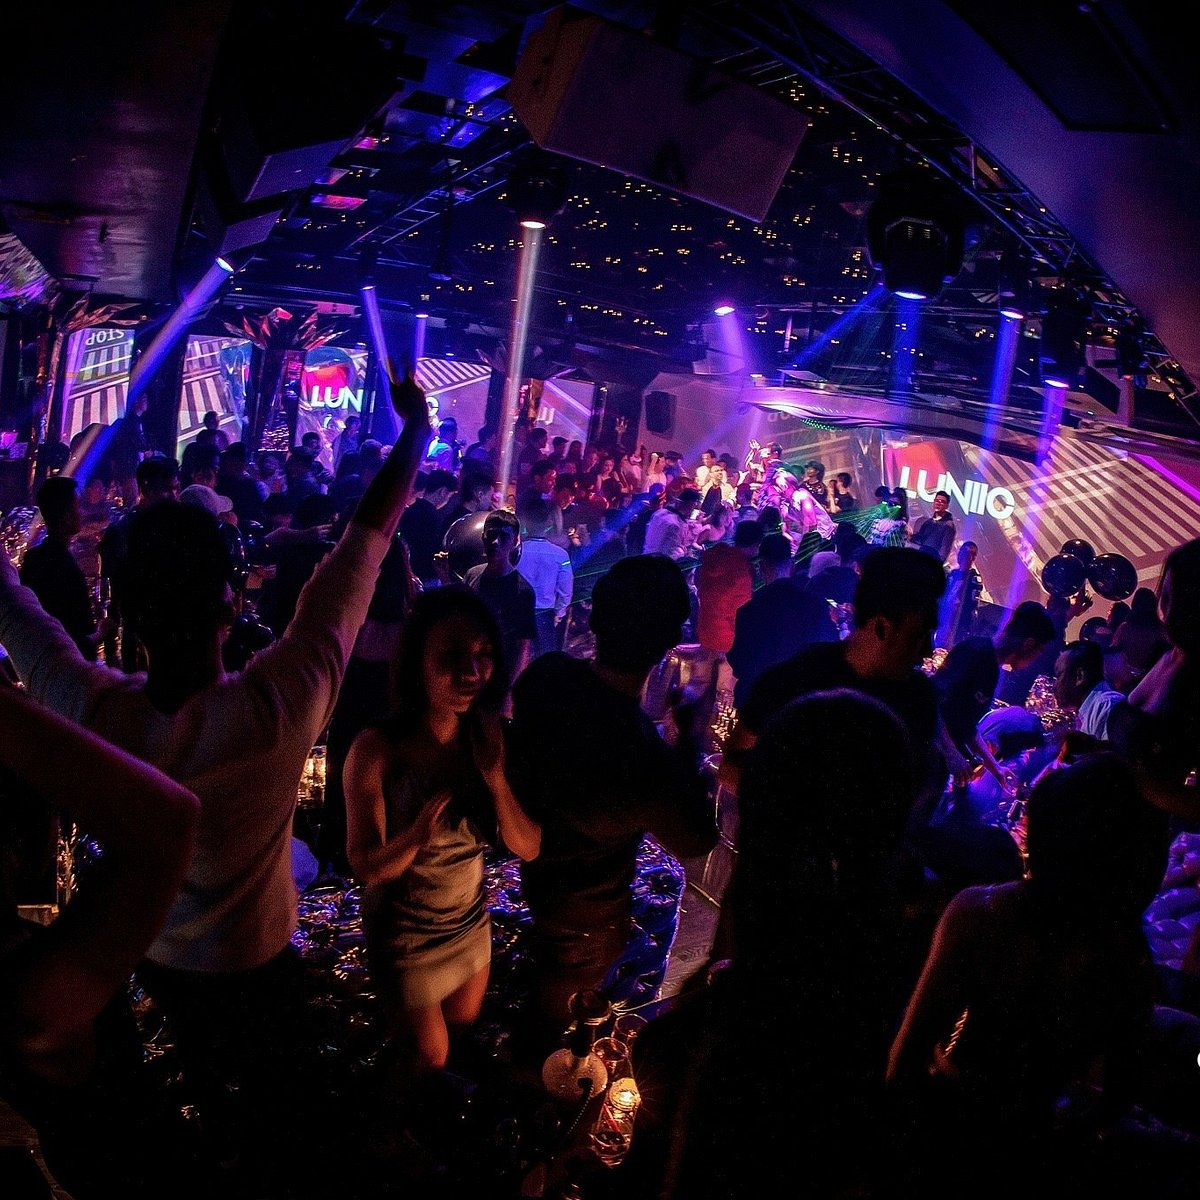 shark-club-hanoi-all-you-need-to-know-before-you-go